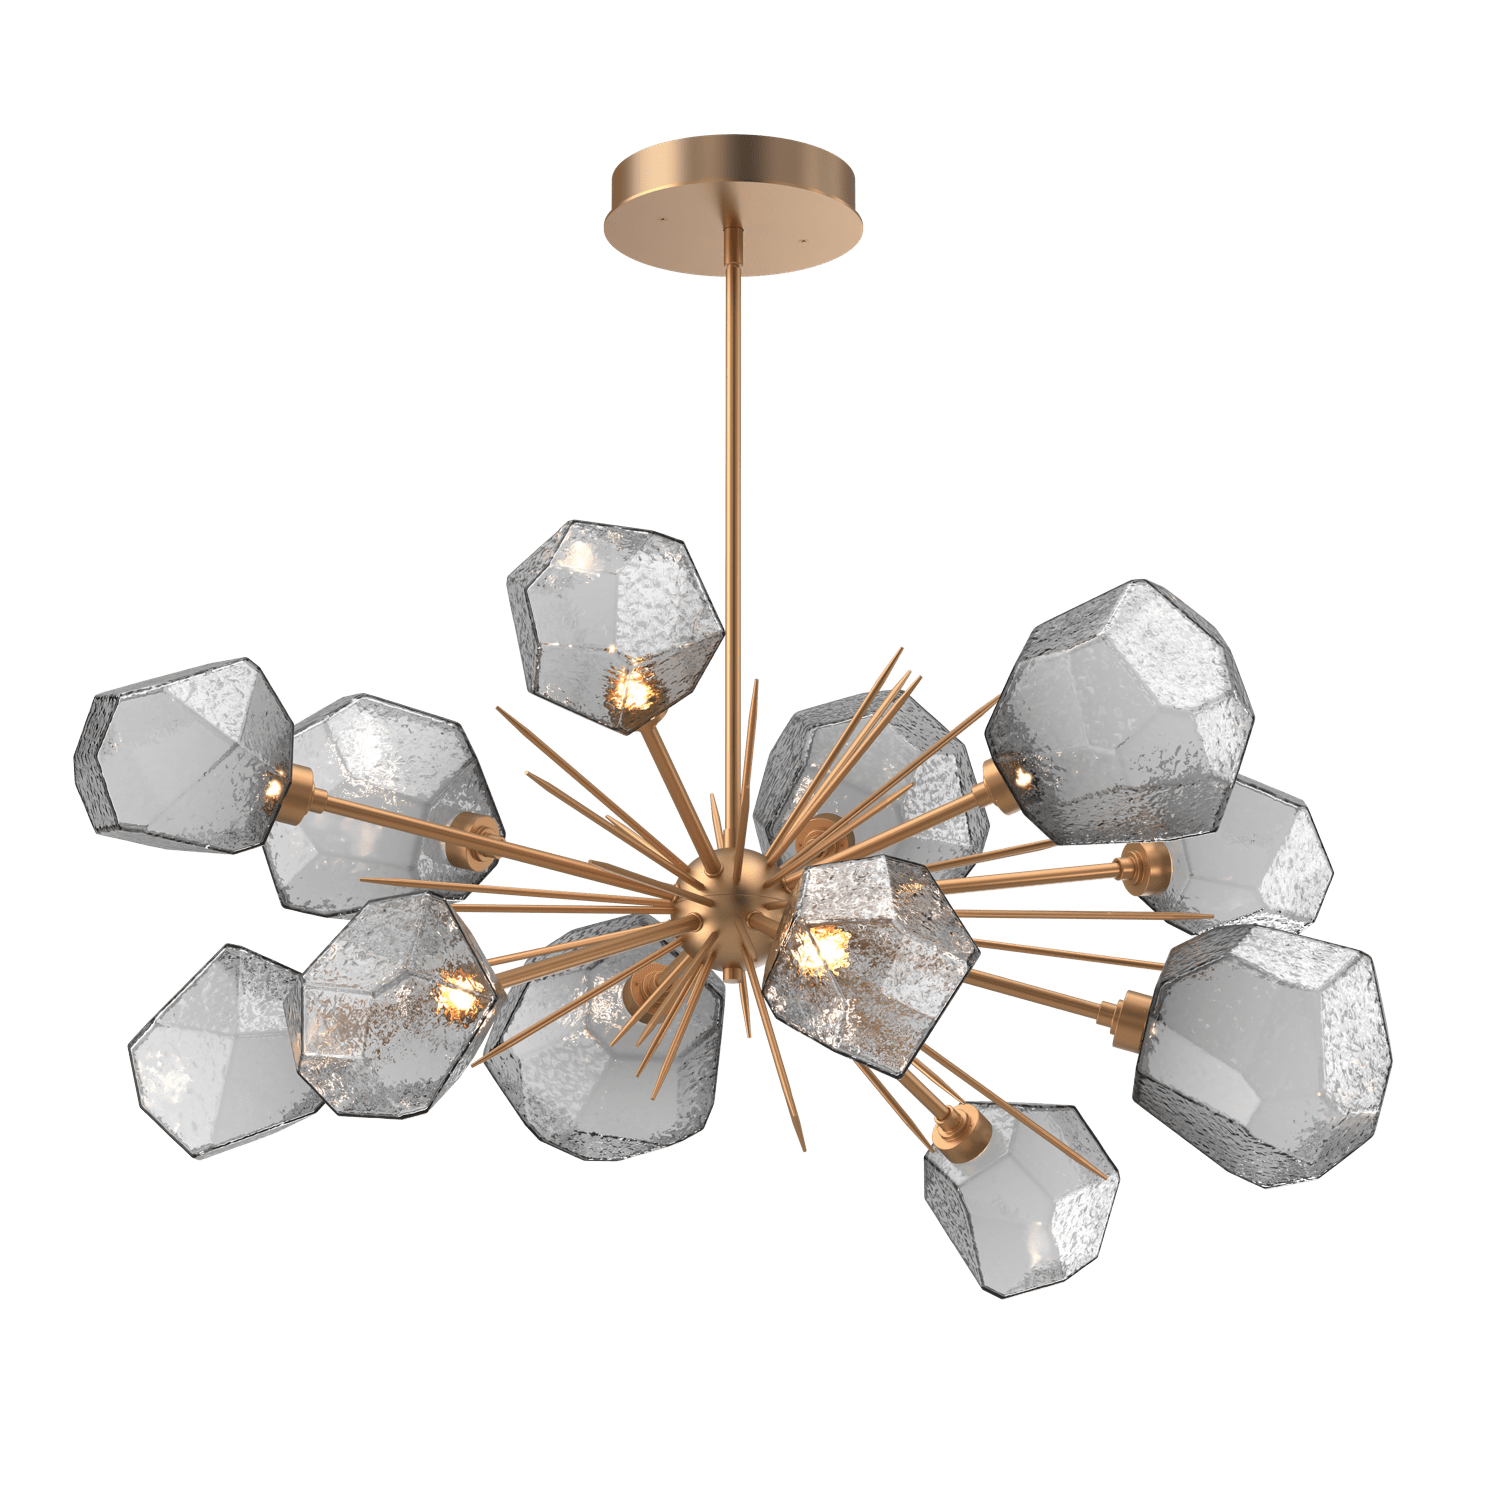 PLB0039-0D-NB-S-Hammerton-Studio-Gem-43-inch-oval-starburst-chandelier-with-novel-brass-finish-and-smoke-blown-glass-shades-and-LED-lamping